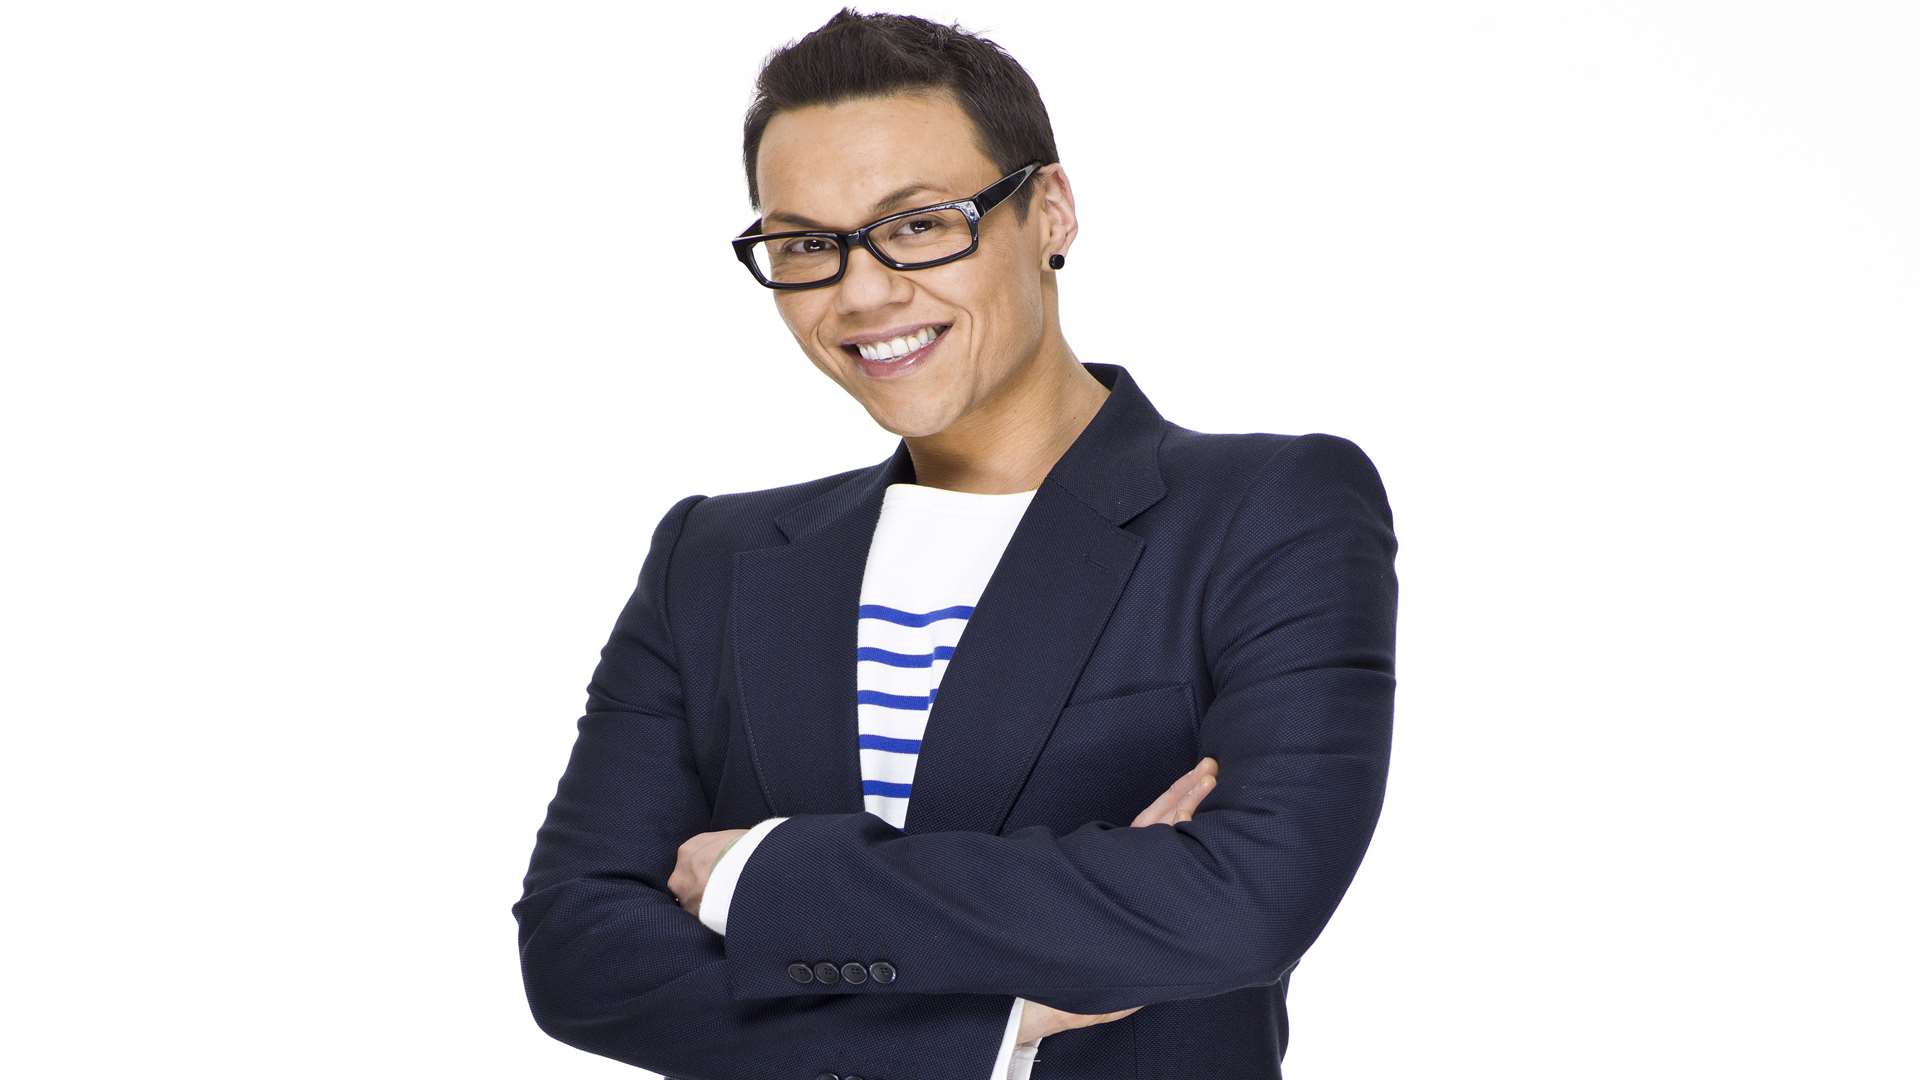 Gok Wan is bringing his first stage show to the Orchard Theatre in Dartford